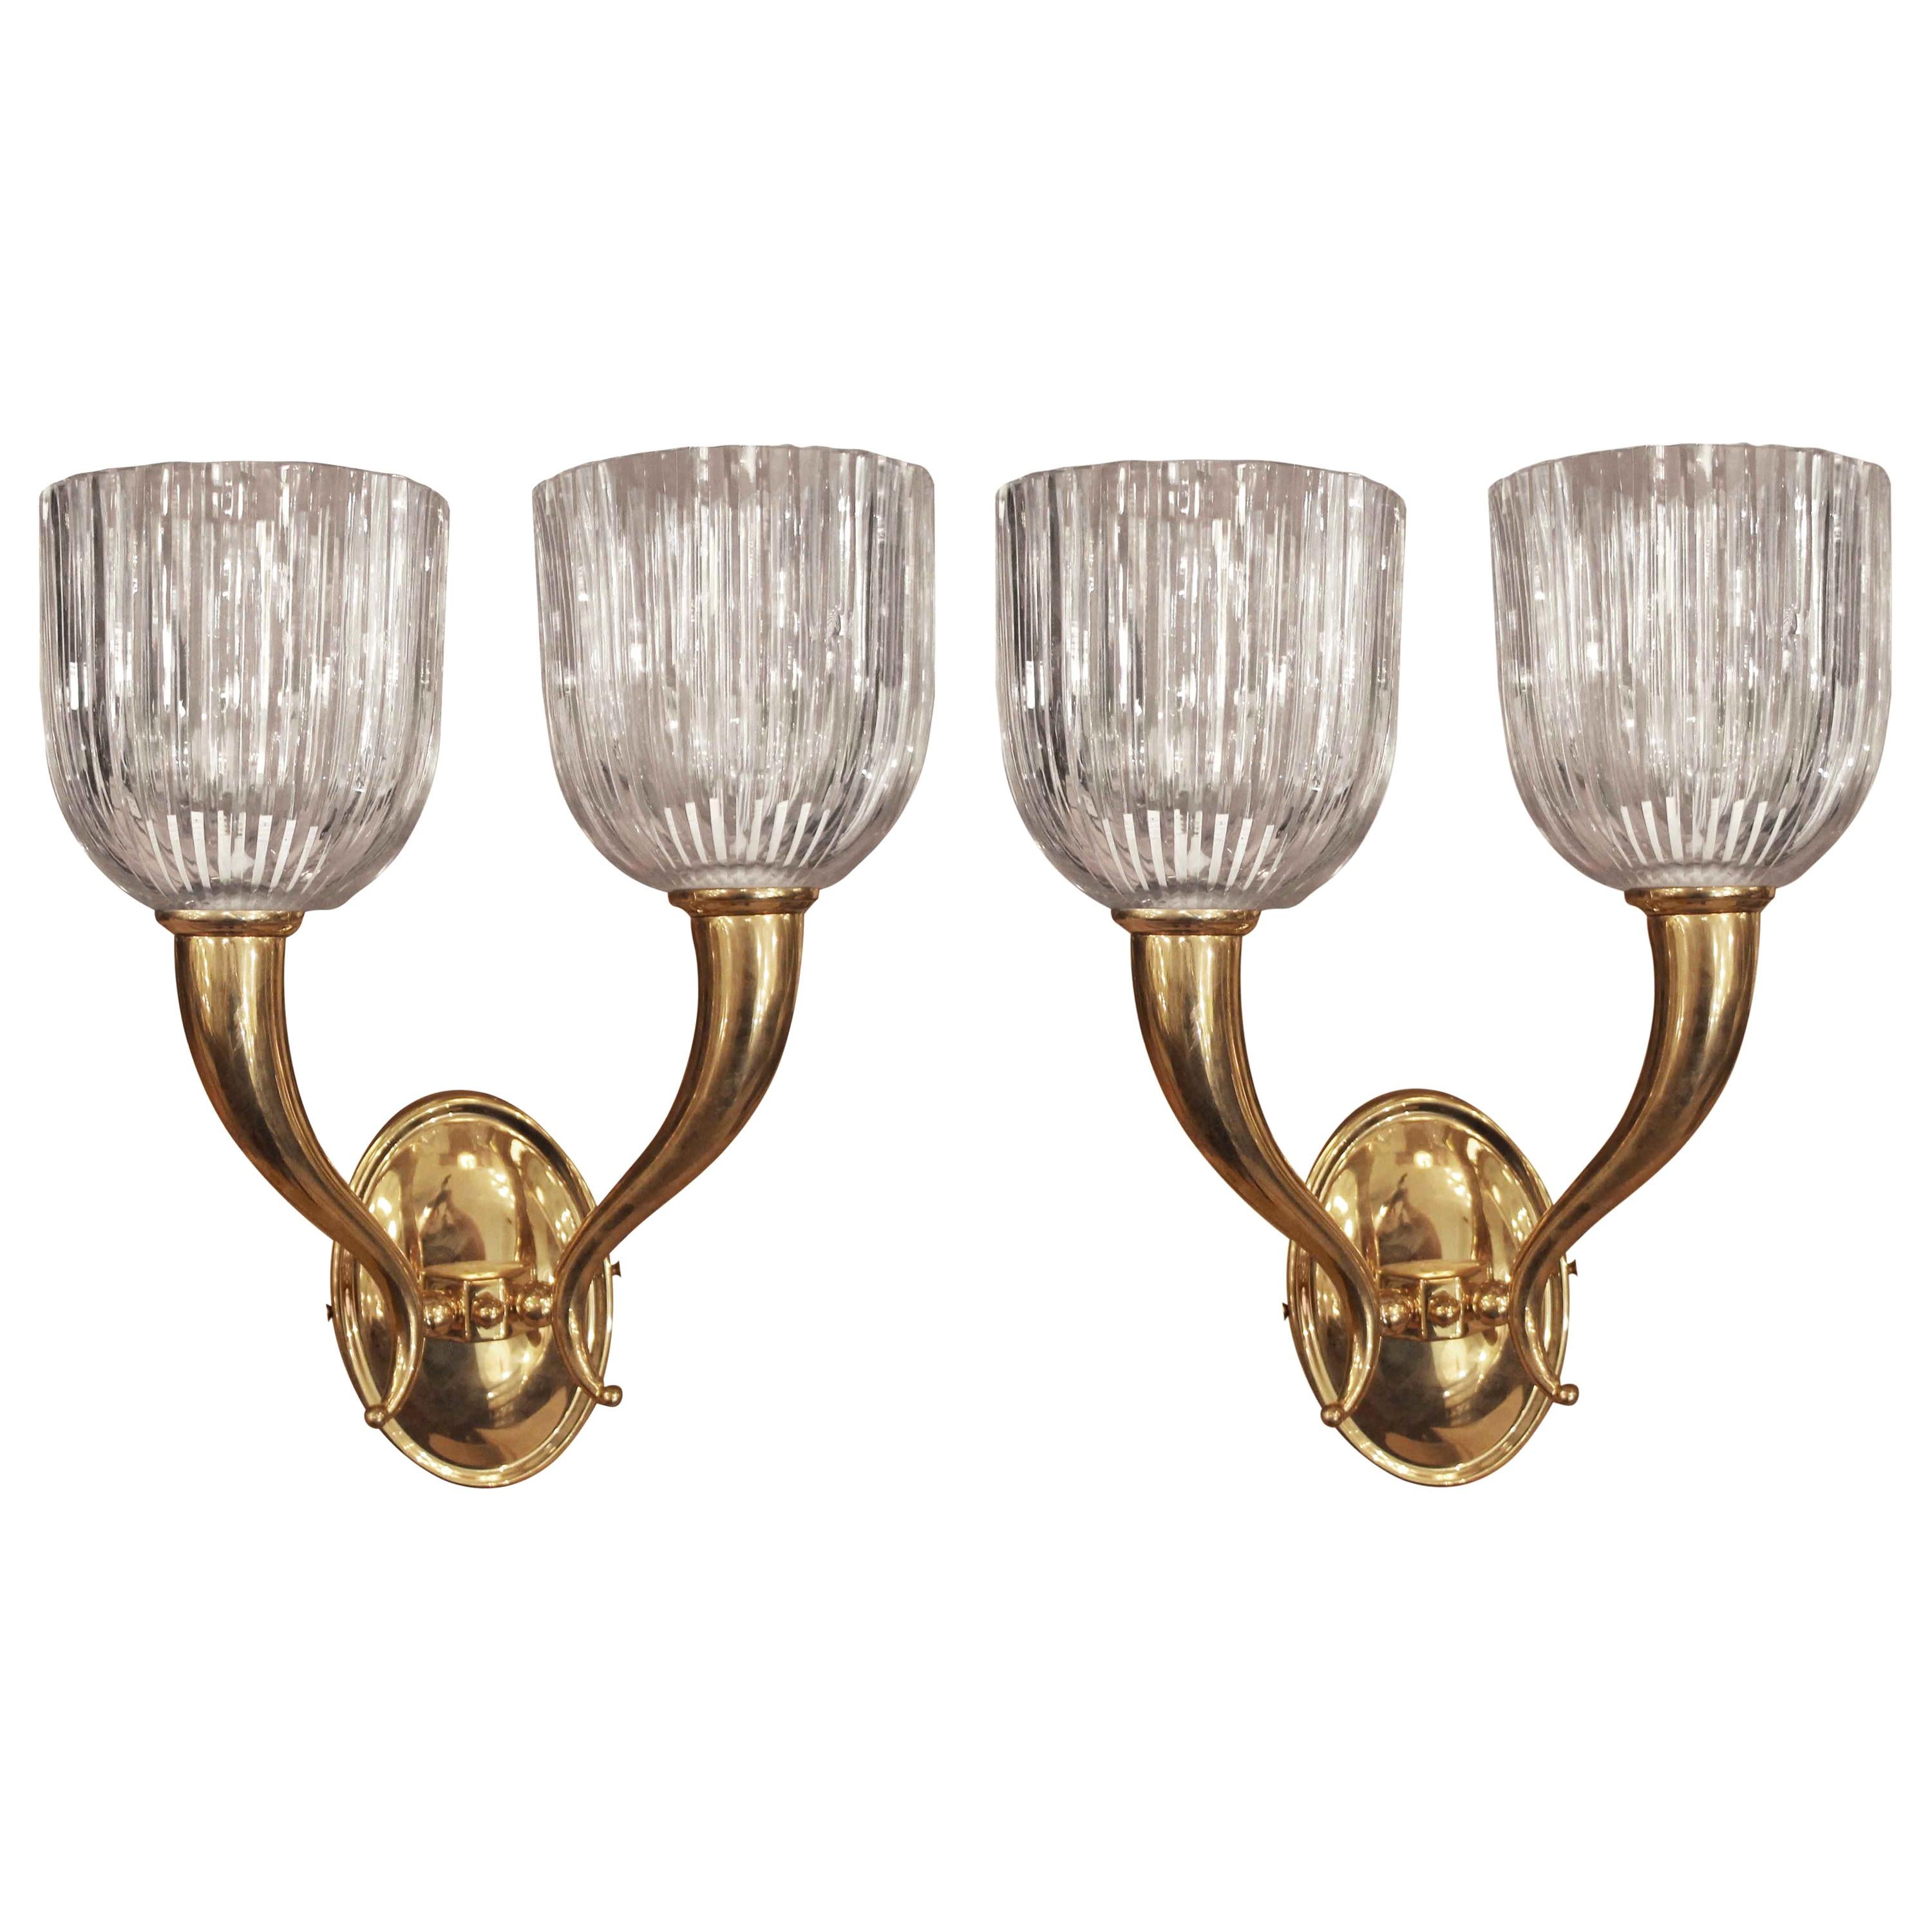 Pair of Modern Italian Brass and Crystal Wall Sconces, 2 Arm, Fluted Shades